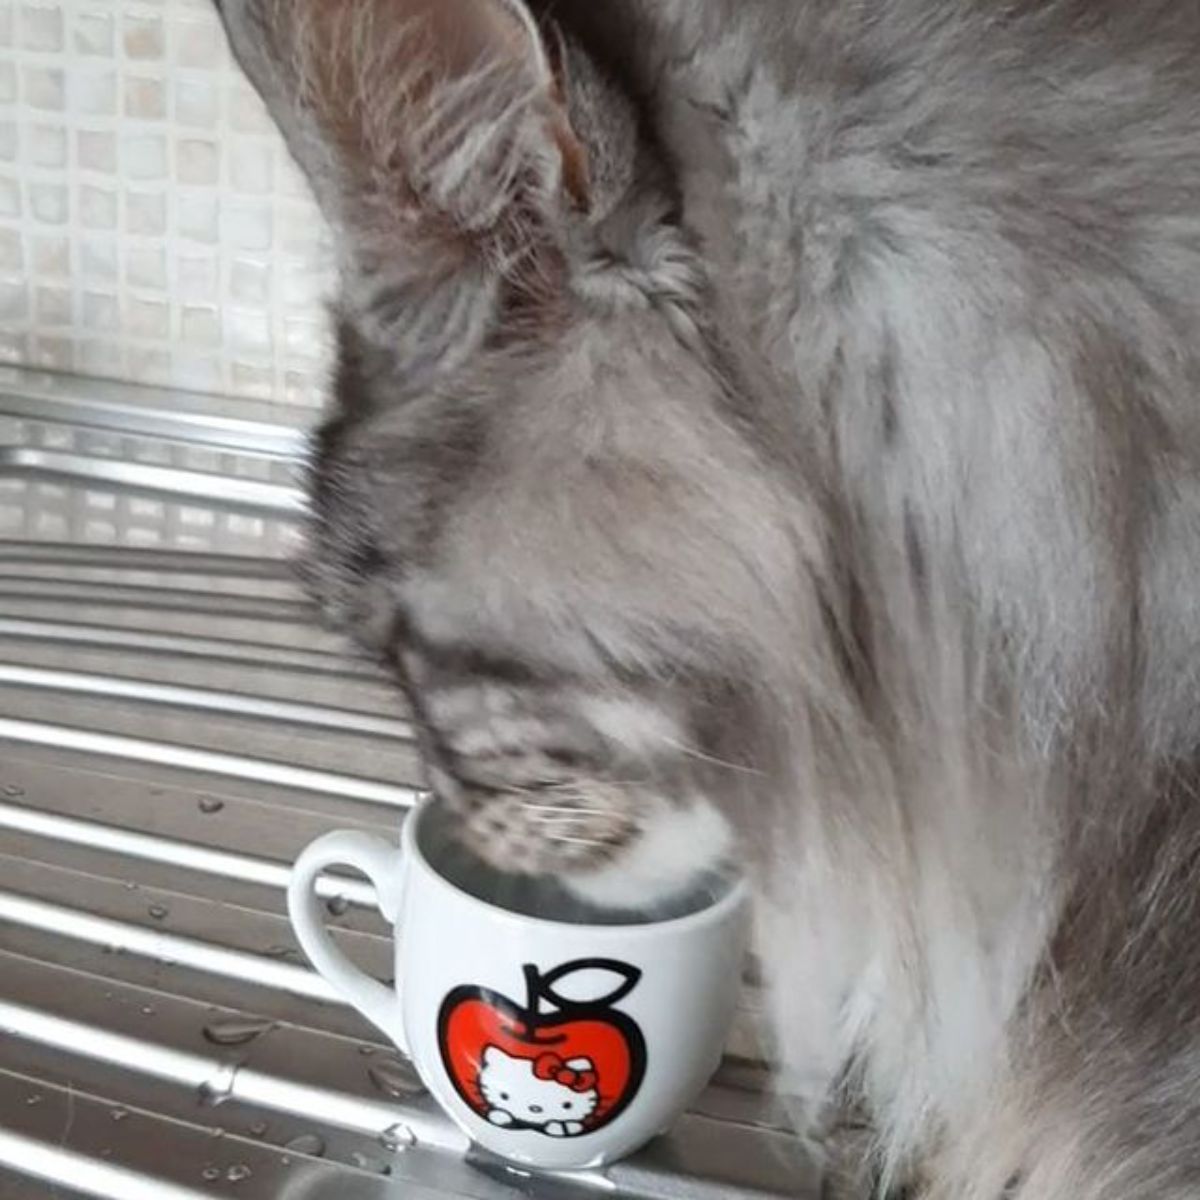 A silver maine coon drinking water from a small cup.